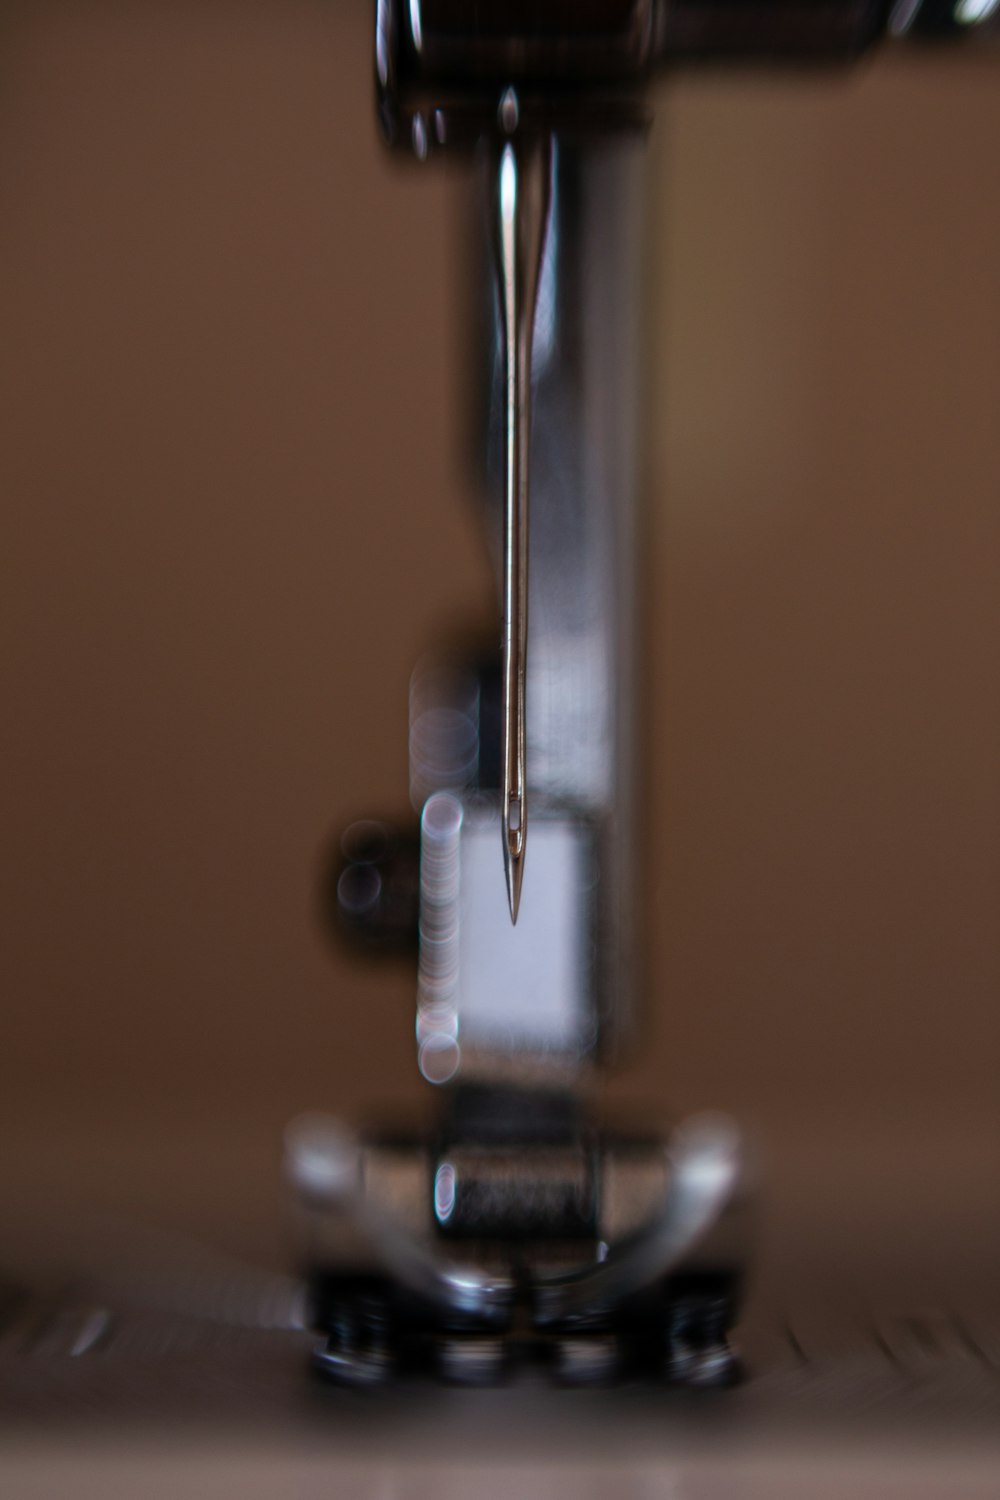 stainless steel tool in close up photography